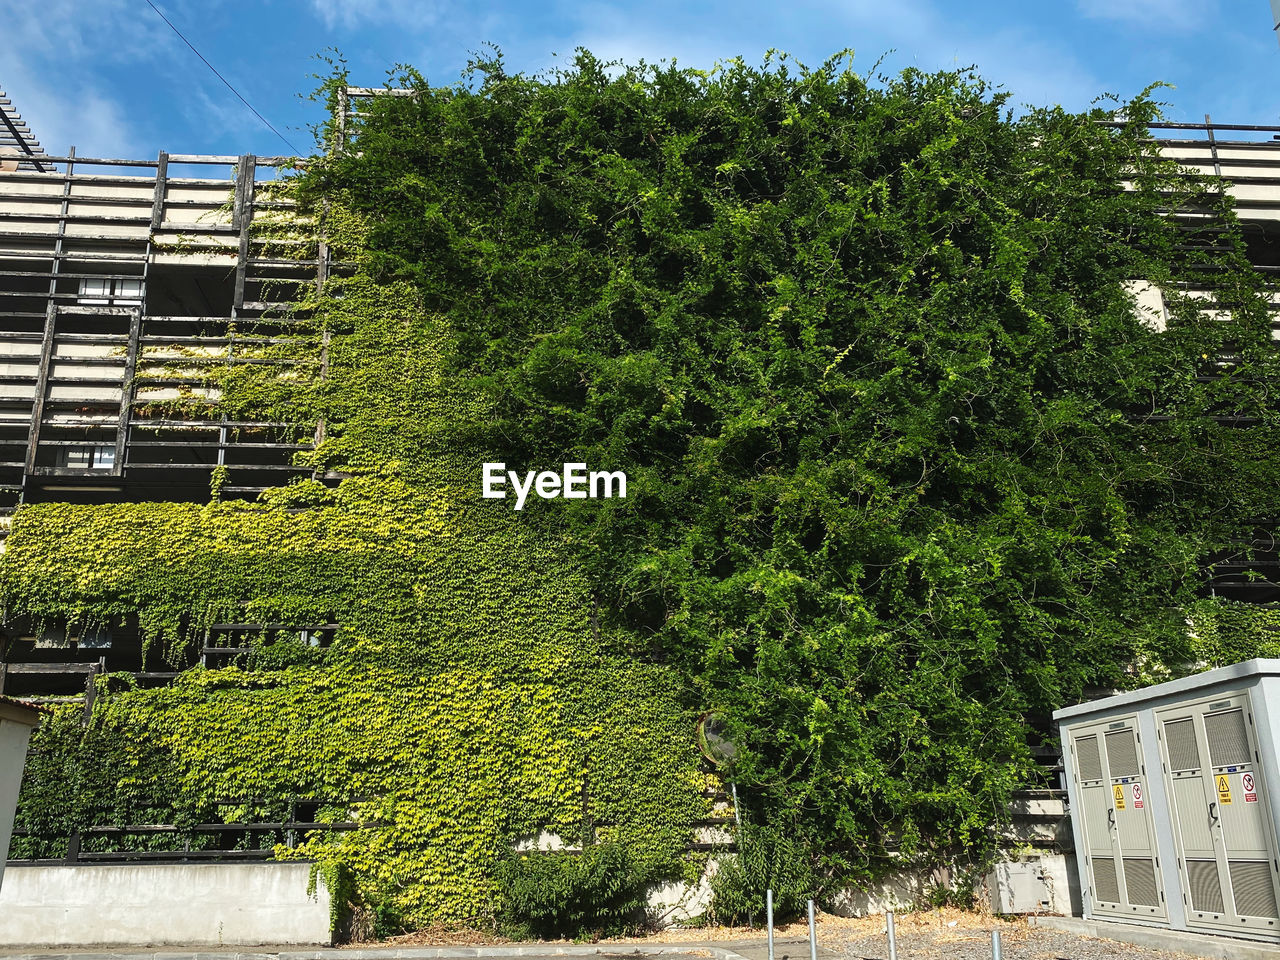 Trees and plants growing outside building